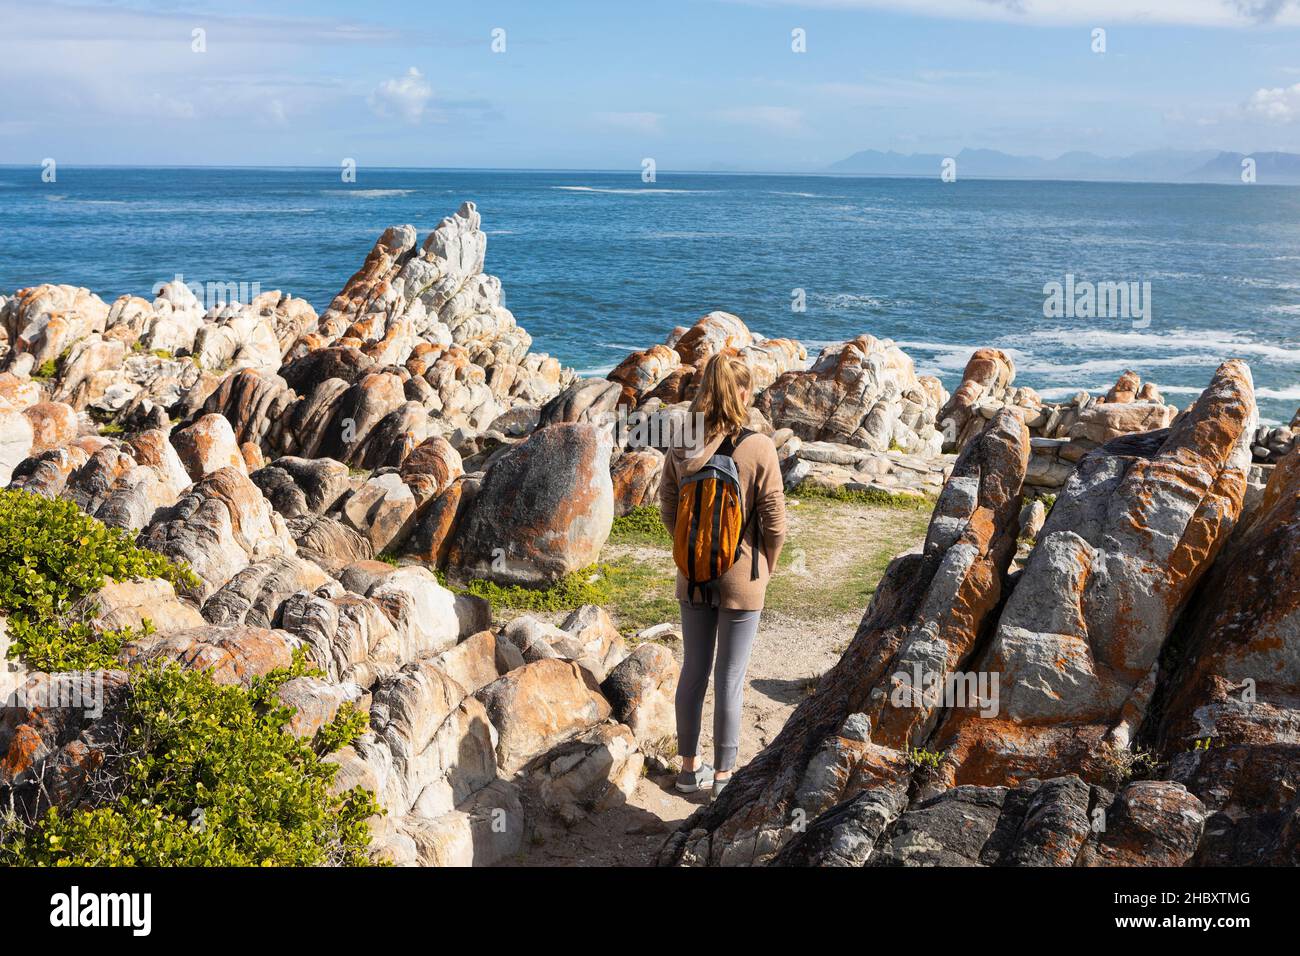 Teenage girl with a backpack standing on the rocks looking over the ocean Stock Photo